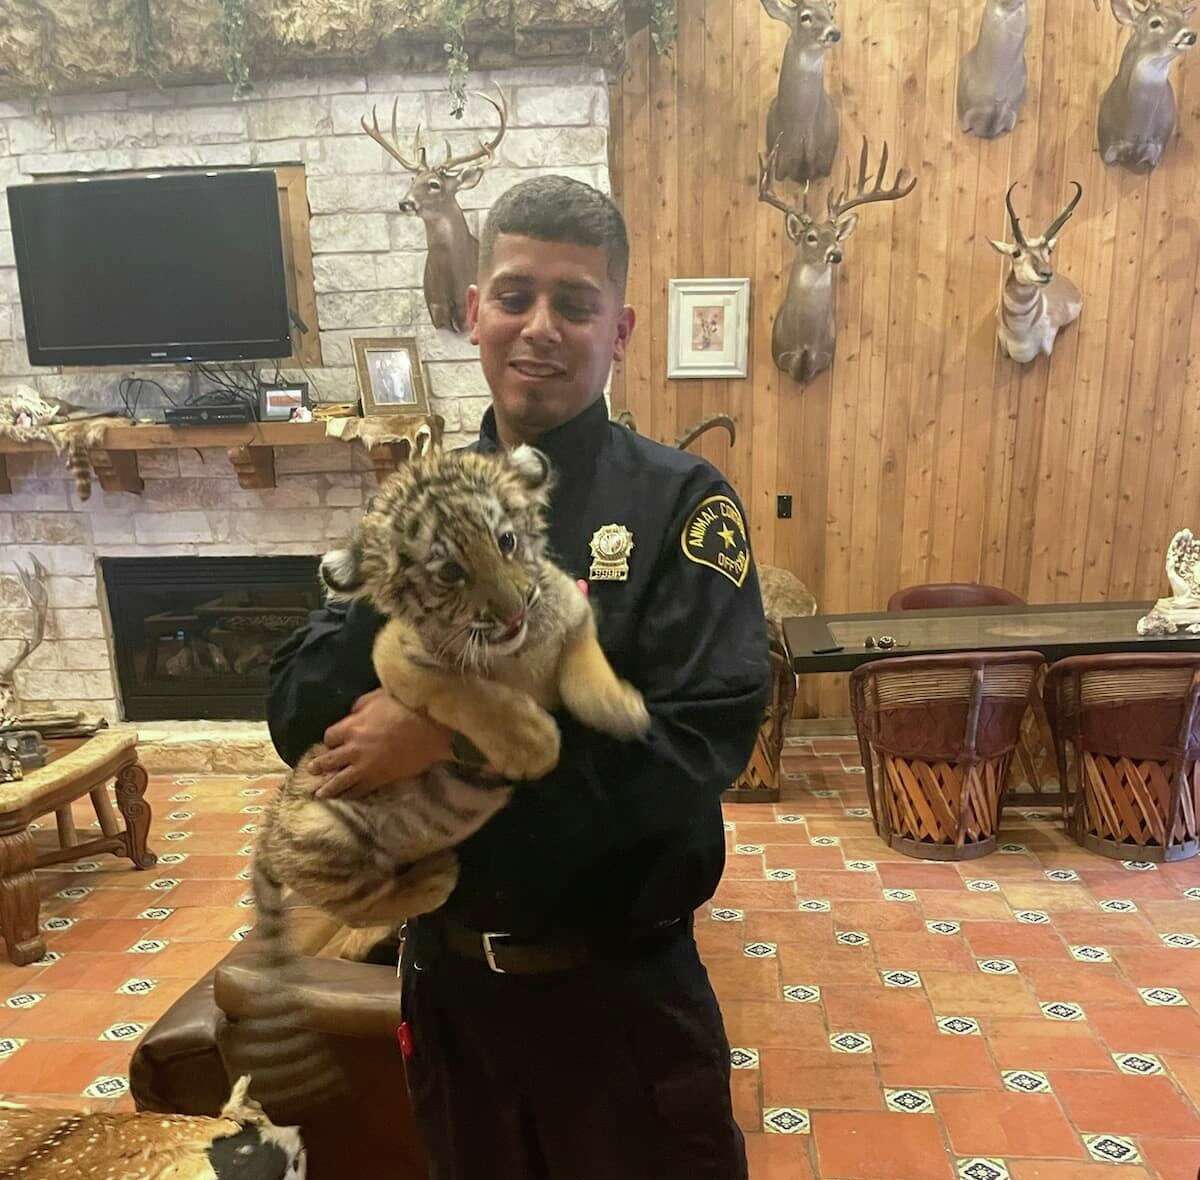 A 3-month-old tiger was found in Laredo and confiscated by Laredo Animal Cares Services